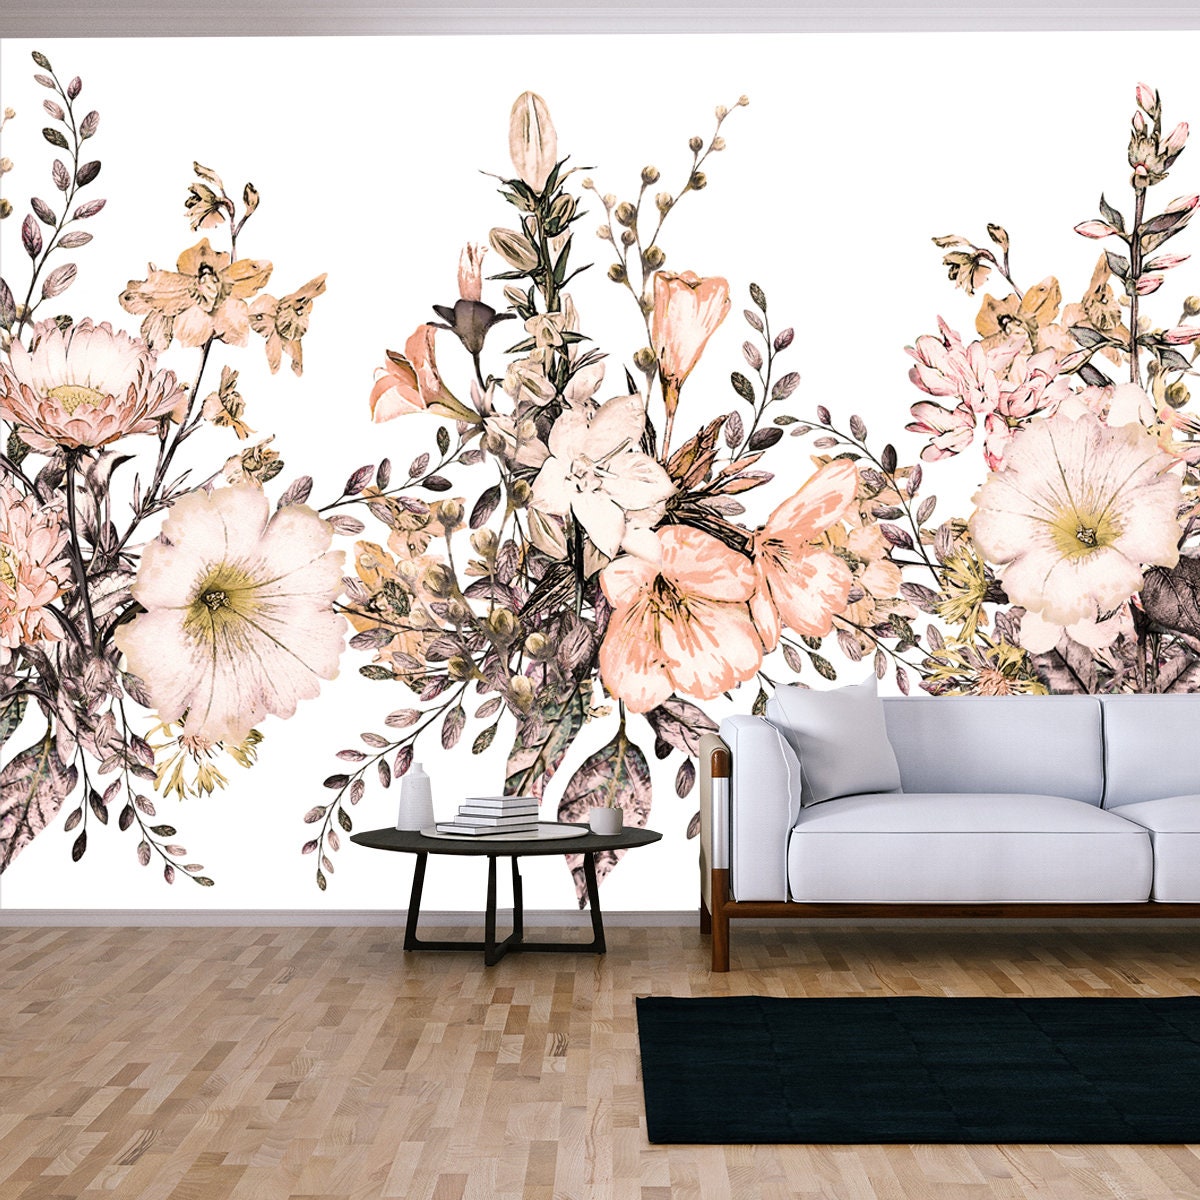 Border with Herbs and Wildflowers and Leaves. Botanical Illustration on White Background Wallpaper Living Room Mural